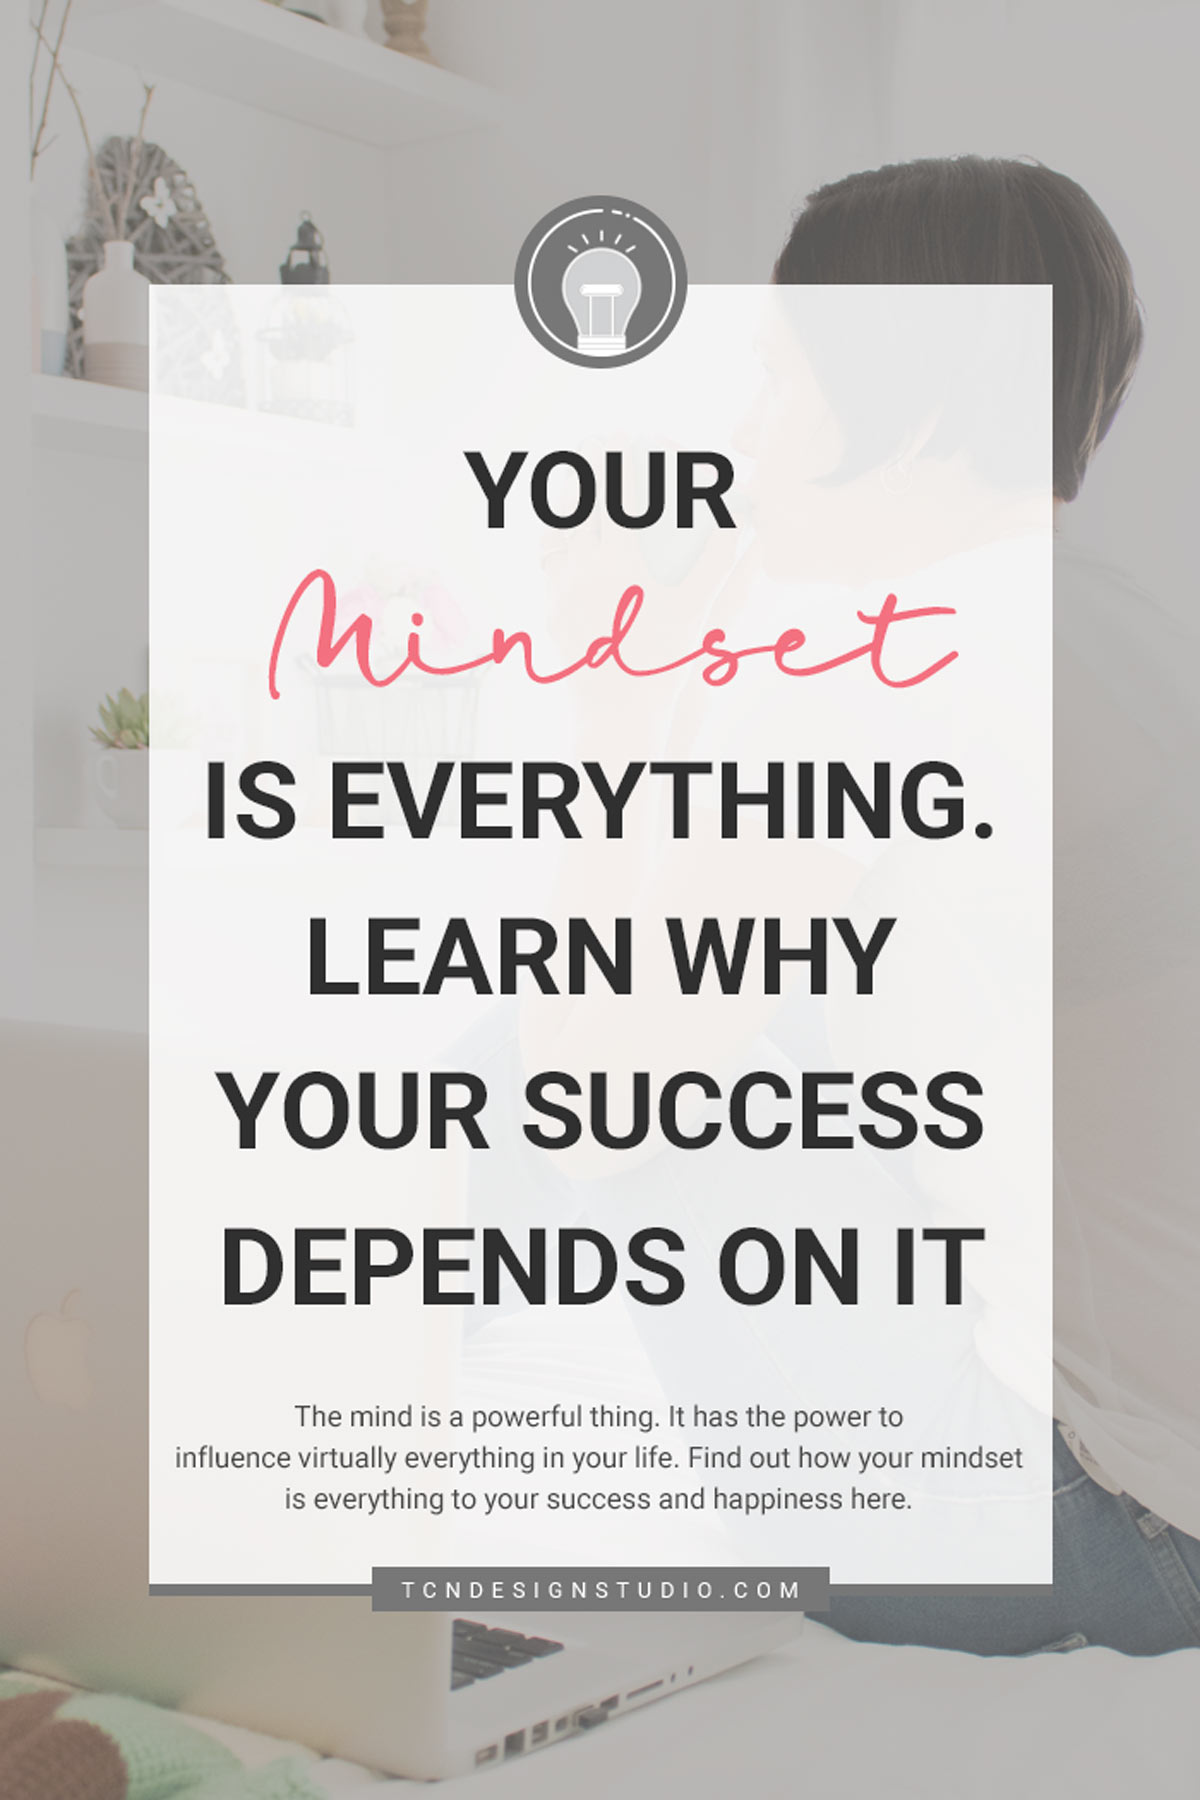 Your Mindset is Everything. Learn Why Your Success Depends on it Cover Image with text overlay